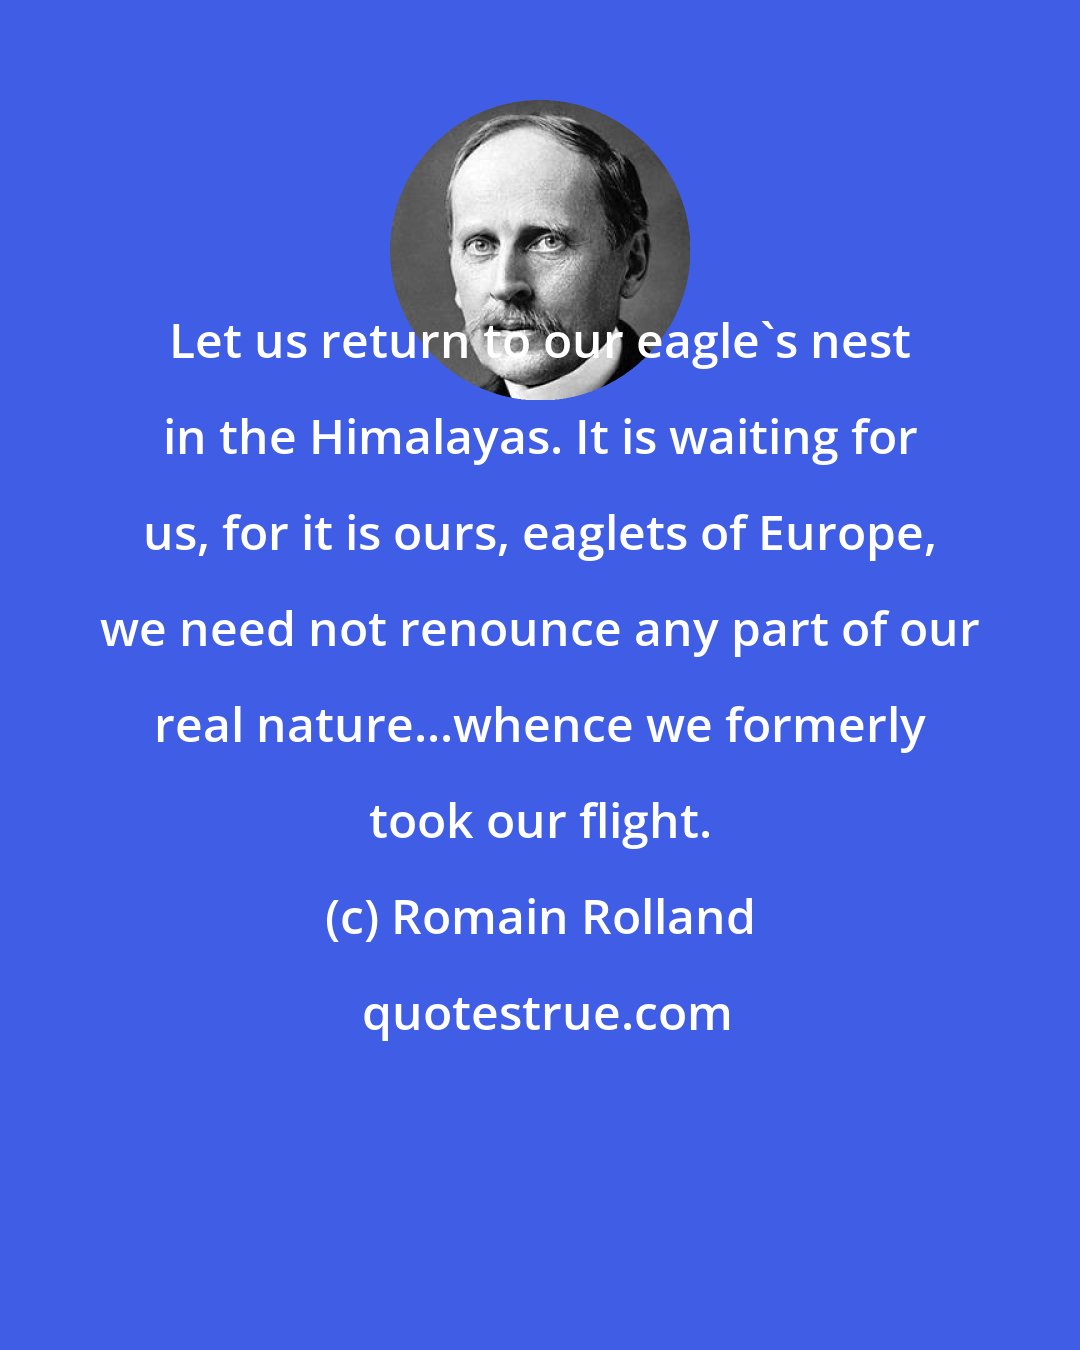 Romain Rolland: Let us return to our eagle's nest in the Himalayas. It is waiting for us, for it is ours, eaglets of Europe, we need not renounce any part of our real nature...whence we formerly took our flight.